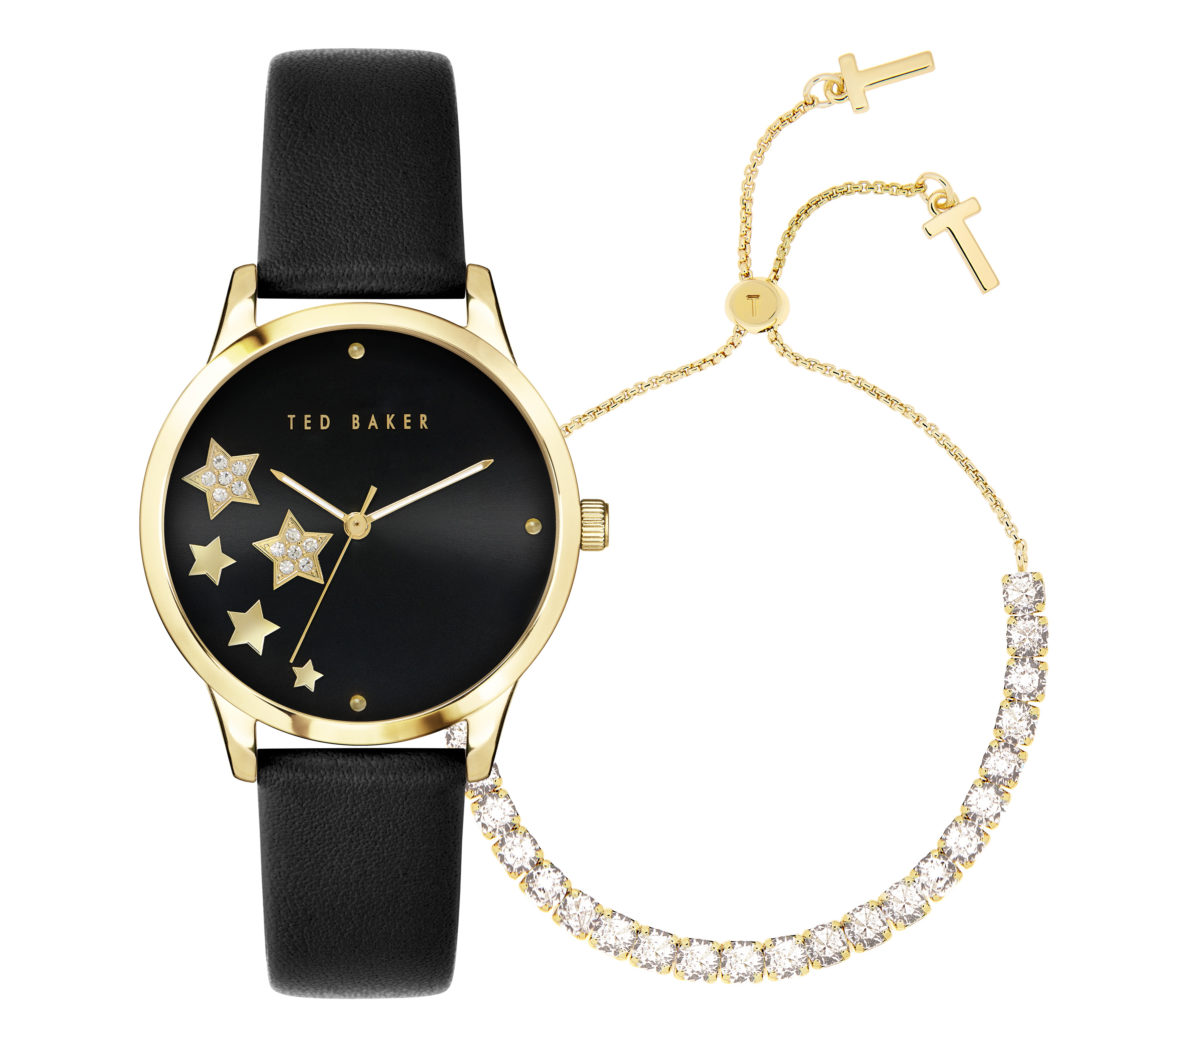 BKGFW2217 ted baker gist set watch and bracelet